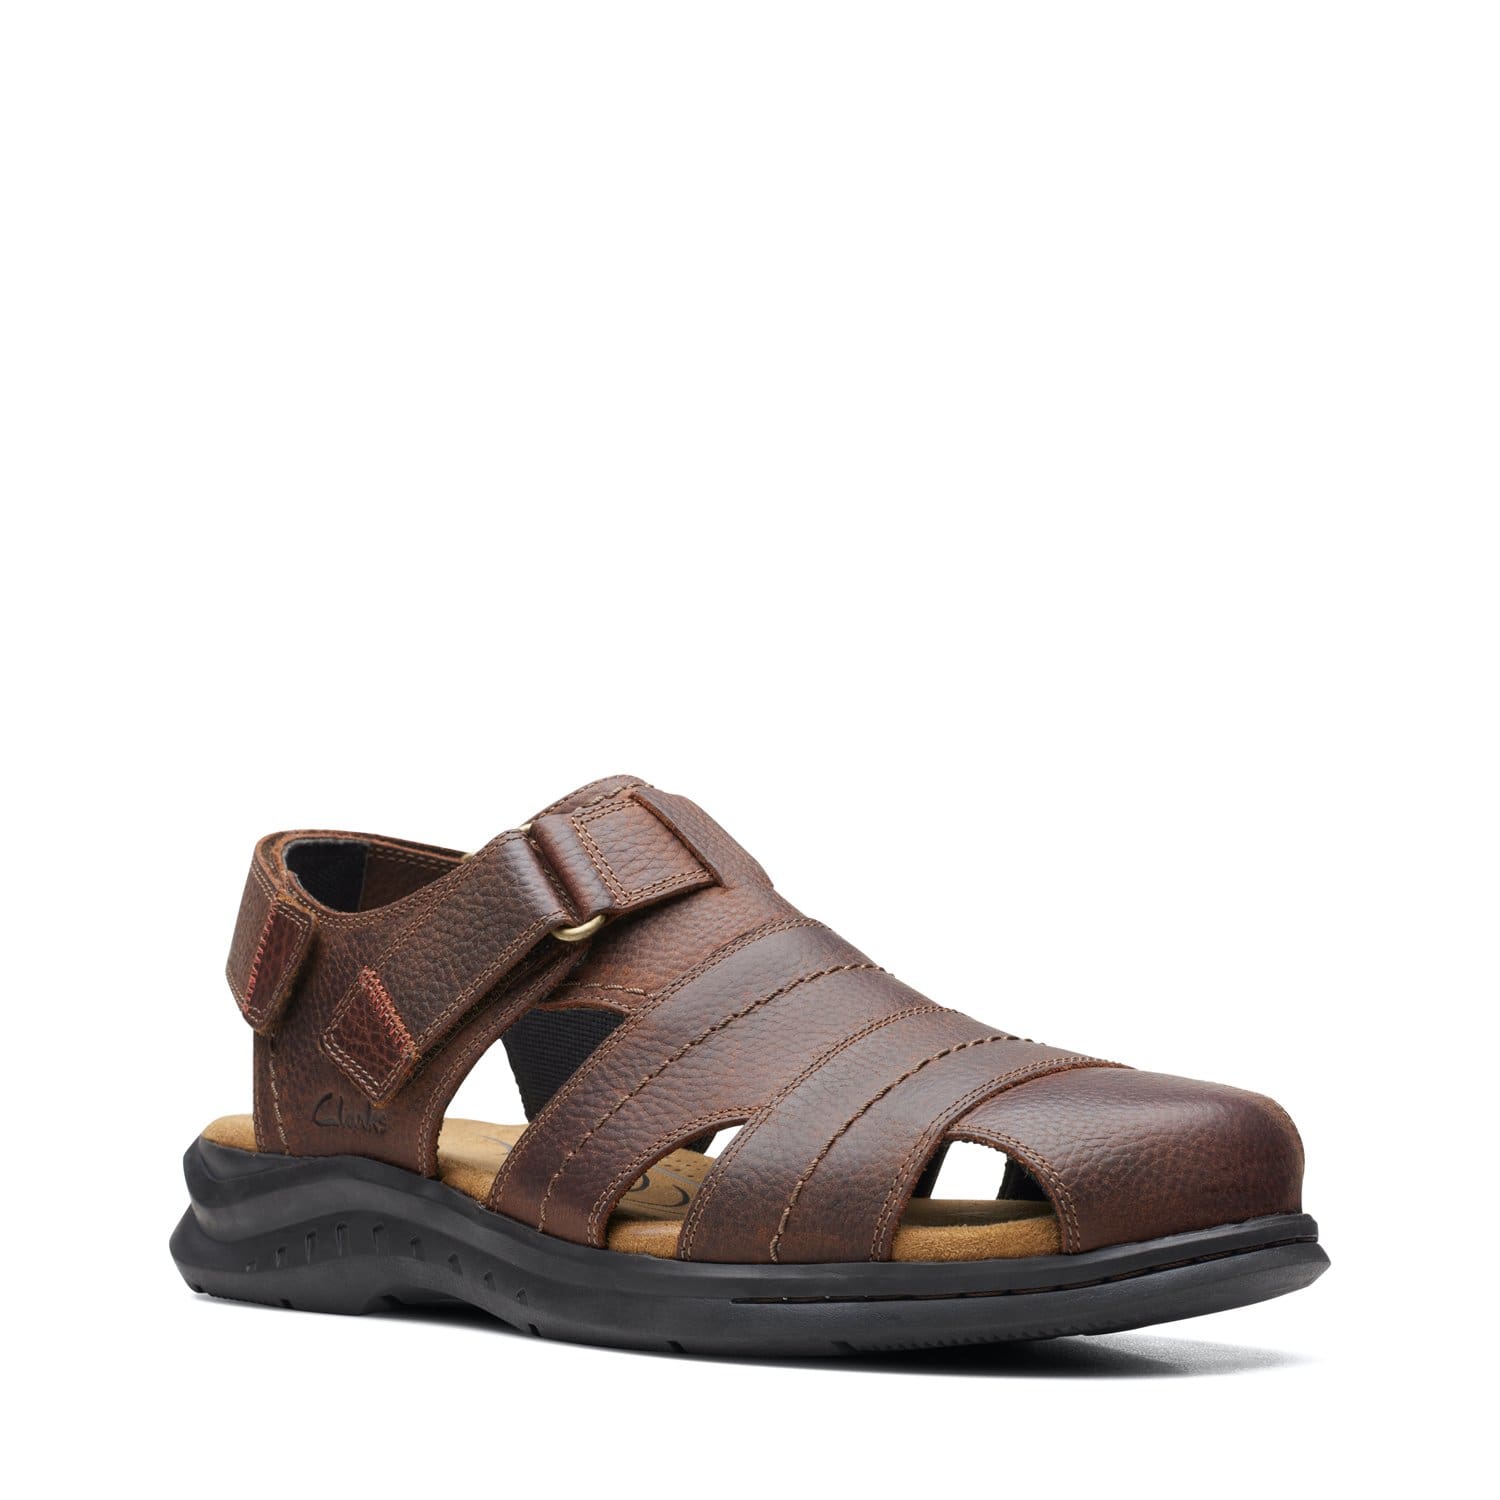 Clarks Hapsford Cove - Sandals - Brown Tumbled - 261580137 - G Width (Standard Fit)